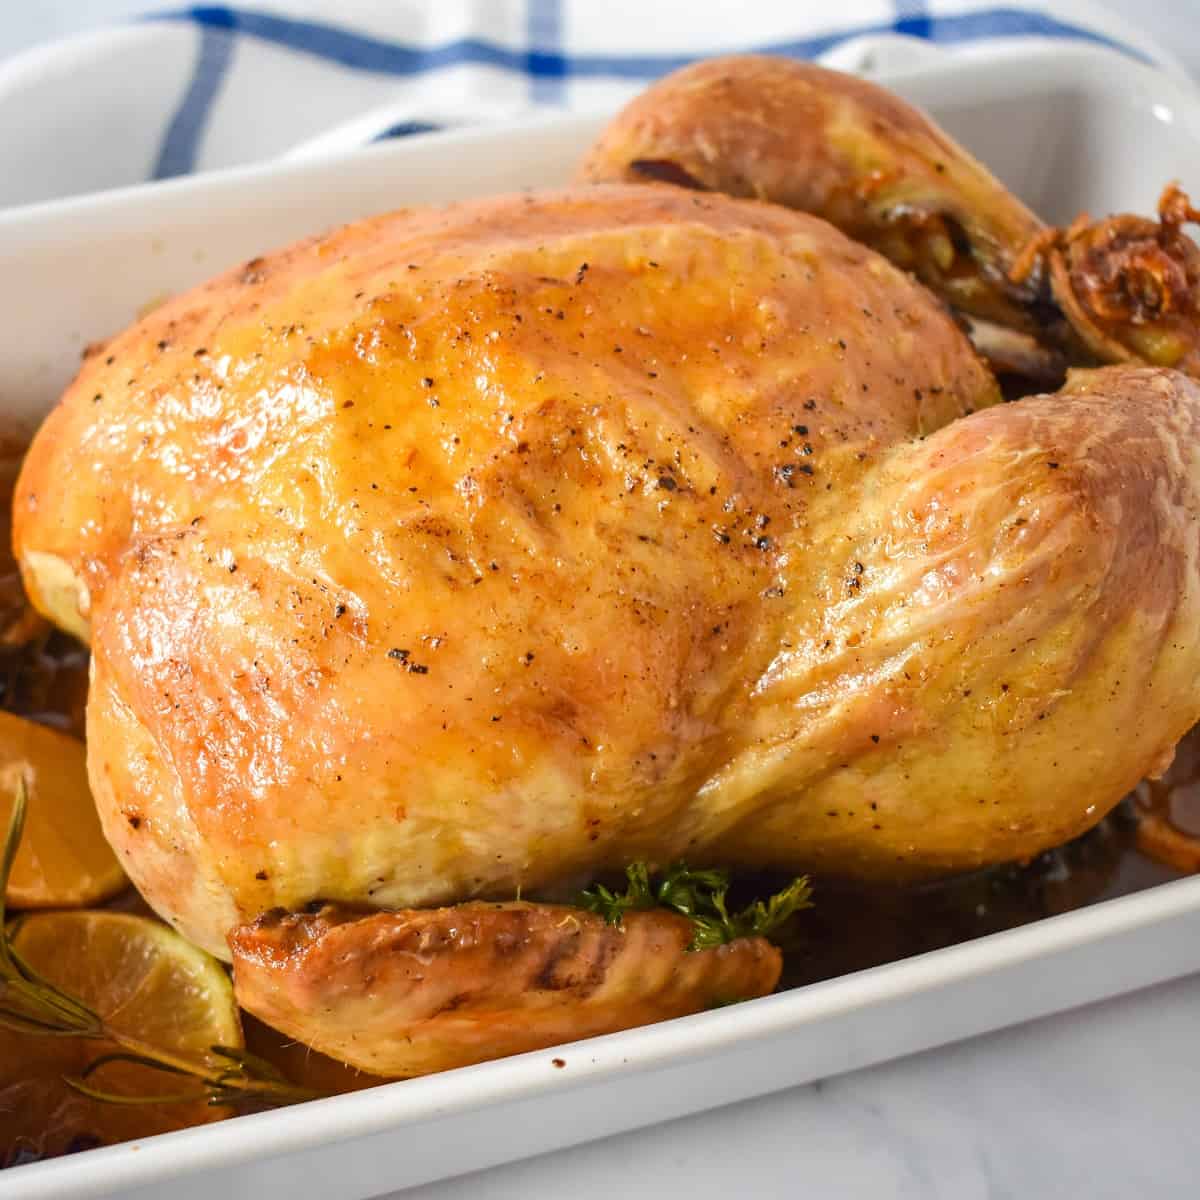 https://www.cook2eatwell.com/wp-content/uploads/2021/02/simply-roasted-chicken-image.jpg